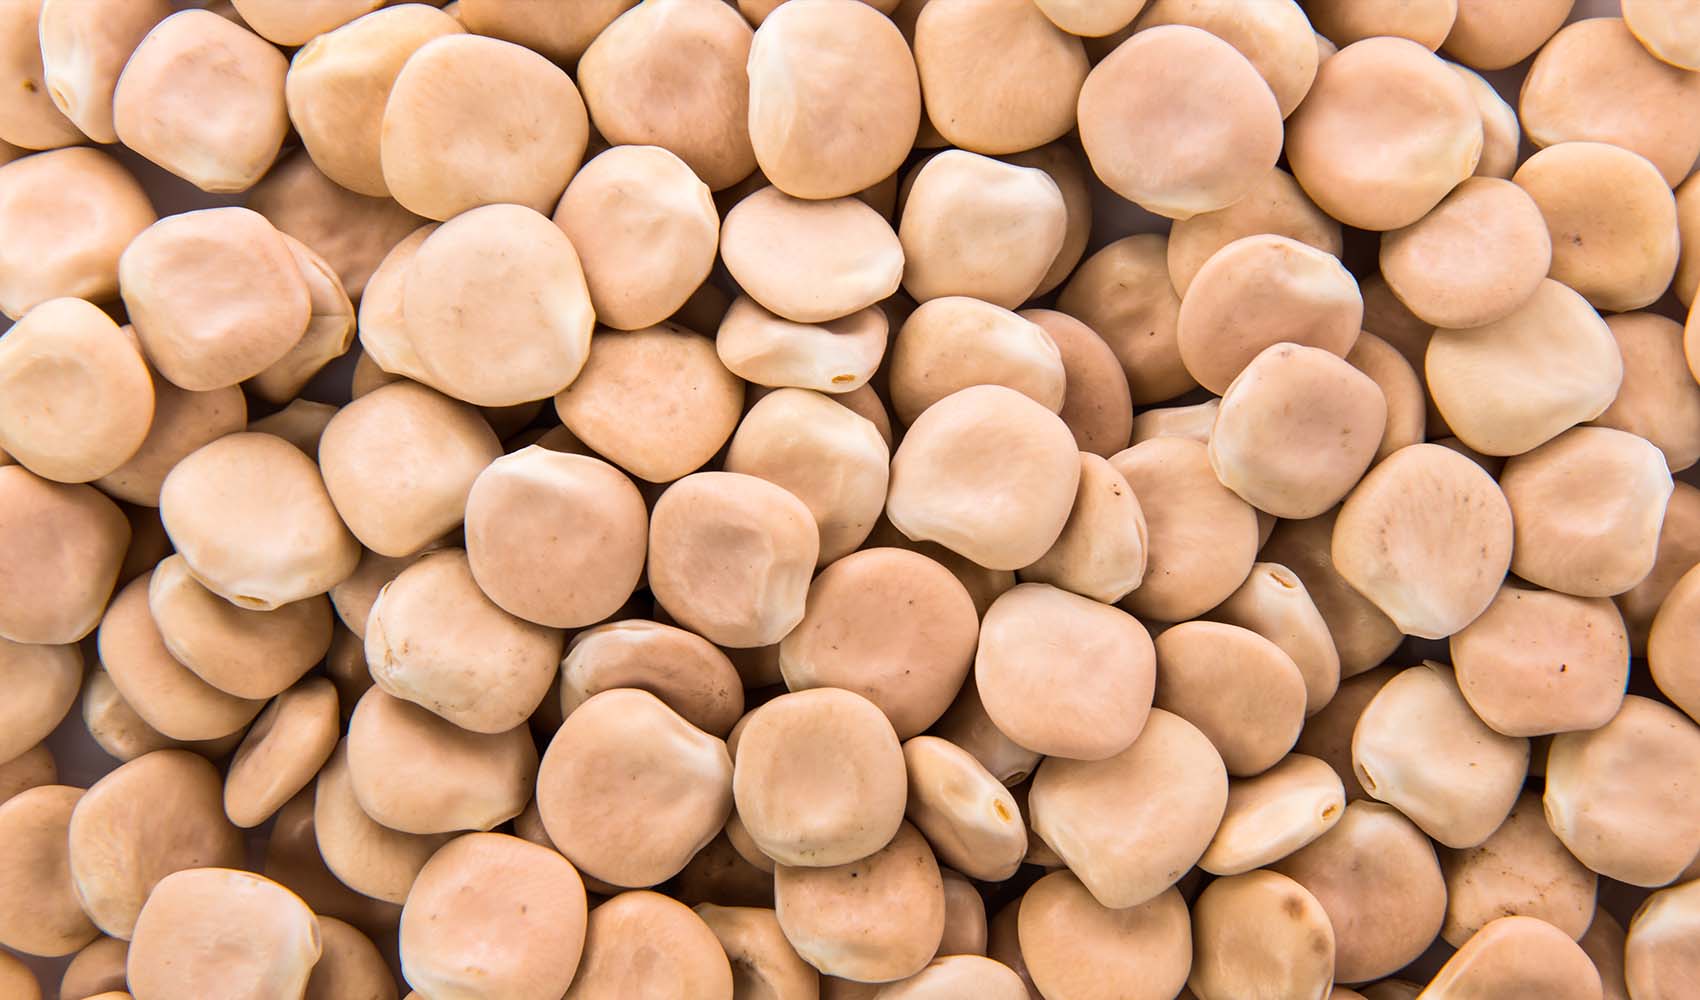 Lupini-Beans-the-Health-Benefits-and-Ways-of-Consuming-Them-3